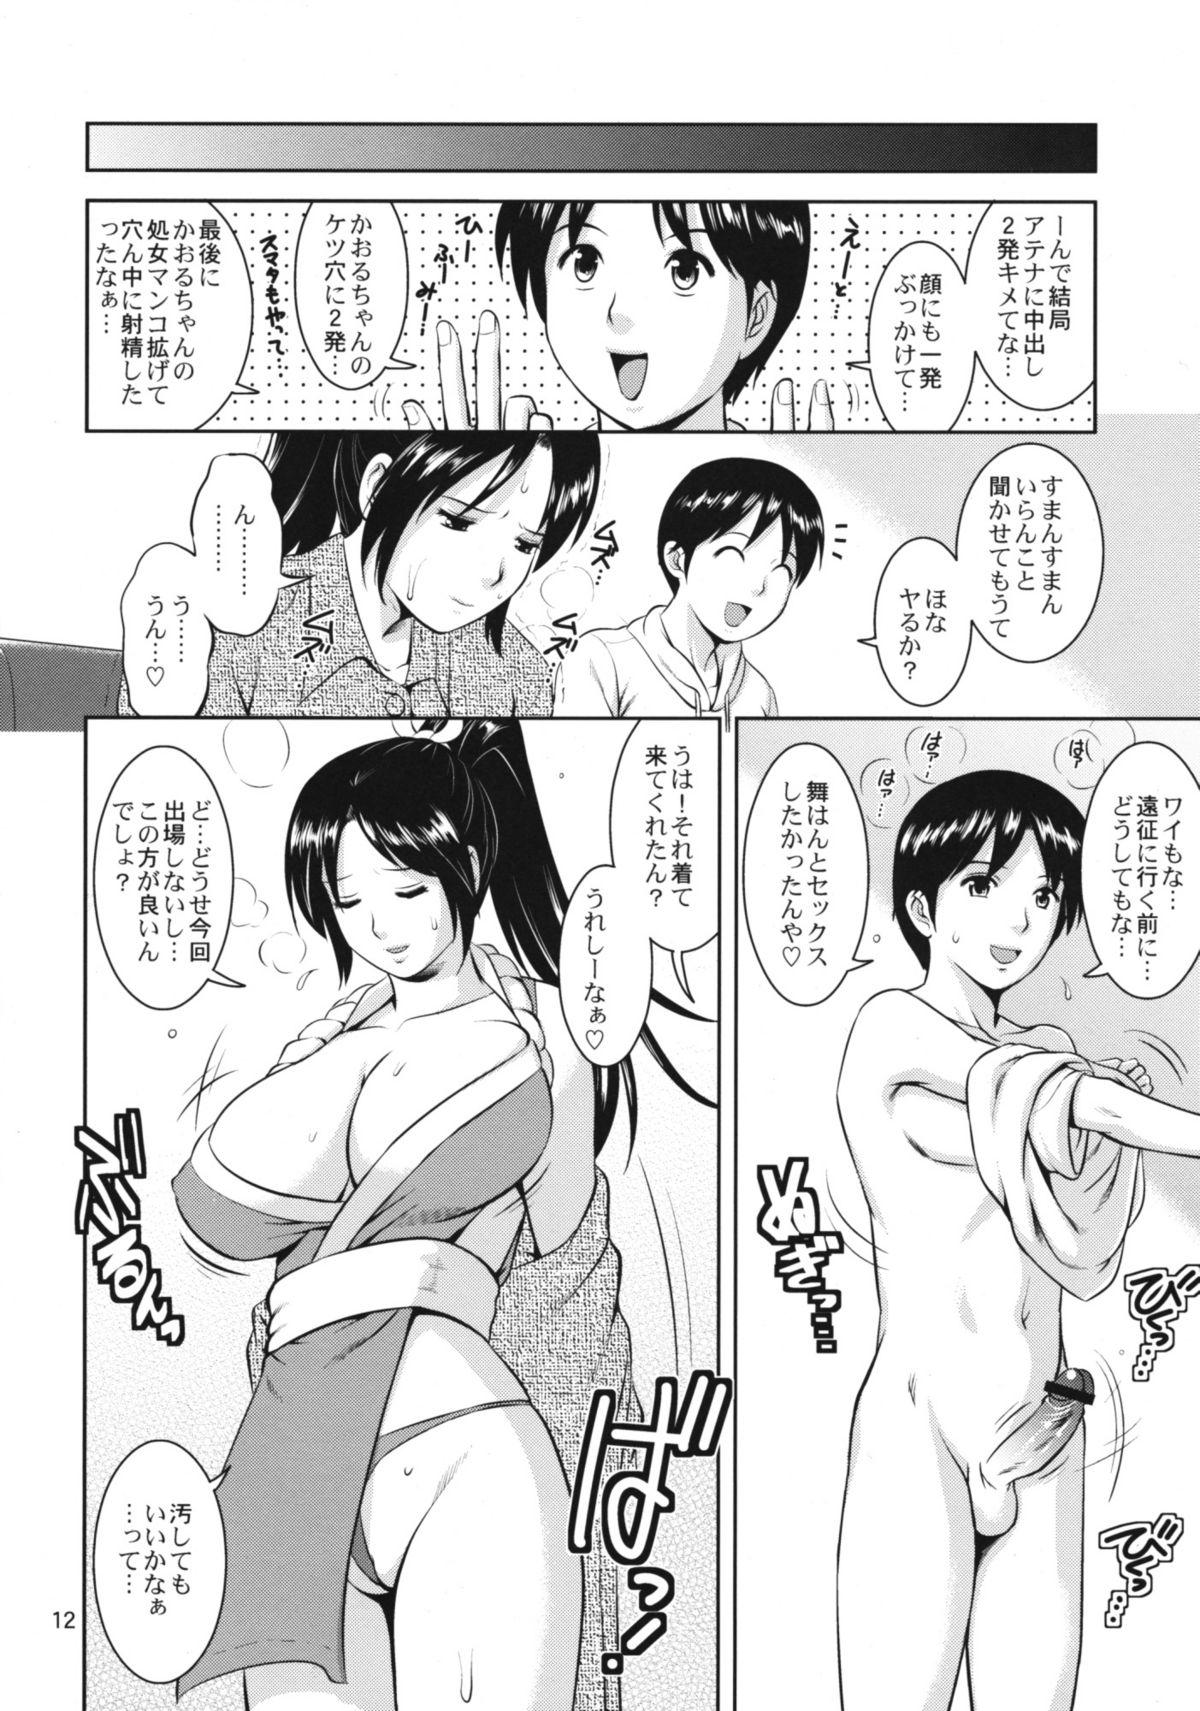 Bokep The Yuri & Friends 2009 UM - Unparticipation of Mai - King of fighters Glam - Page 11